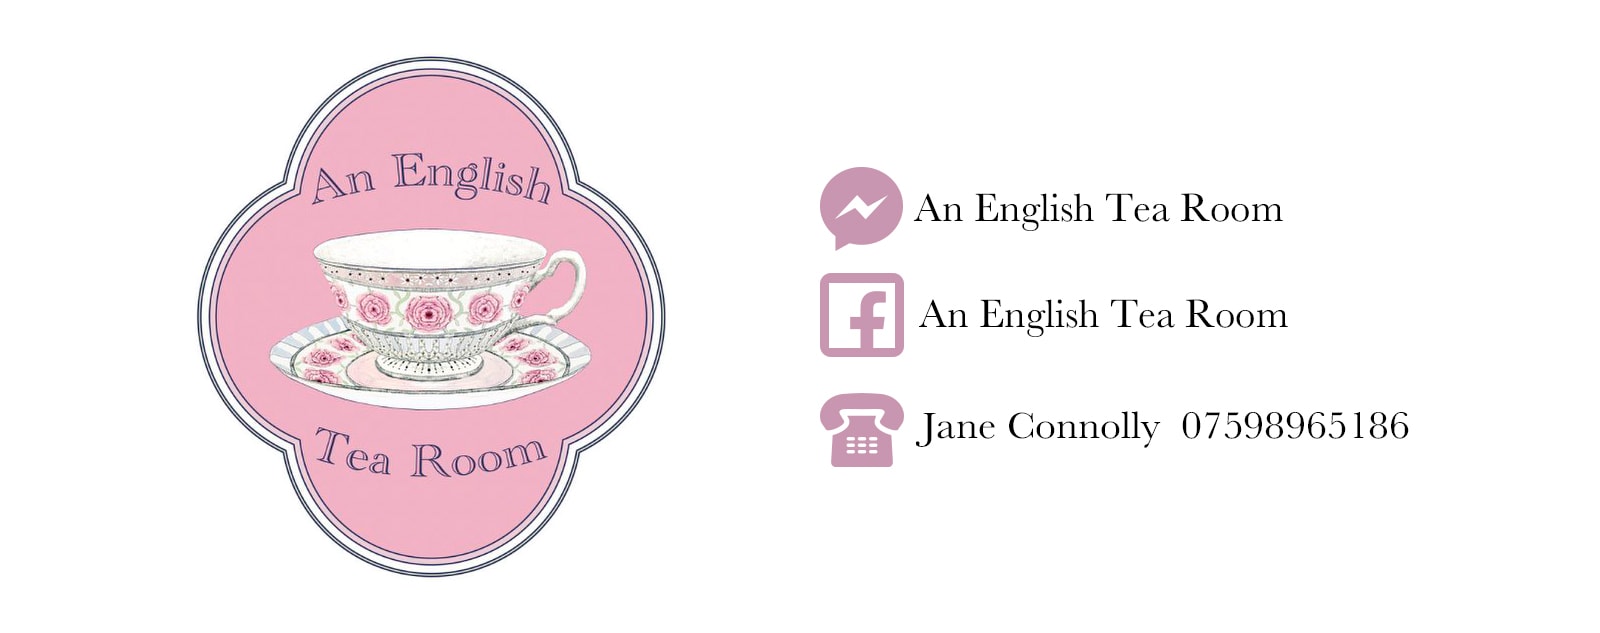 contact details for an english tea room